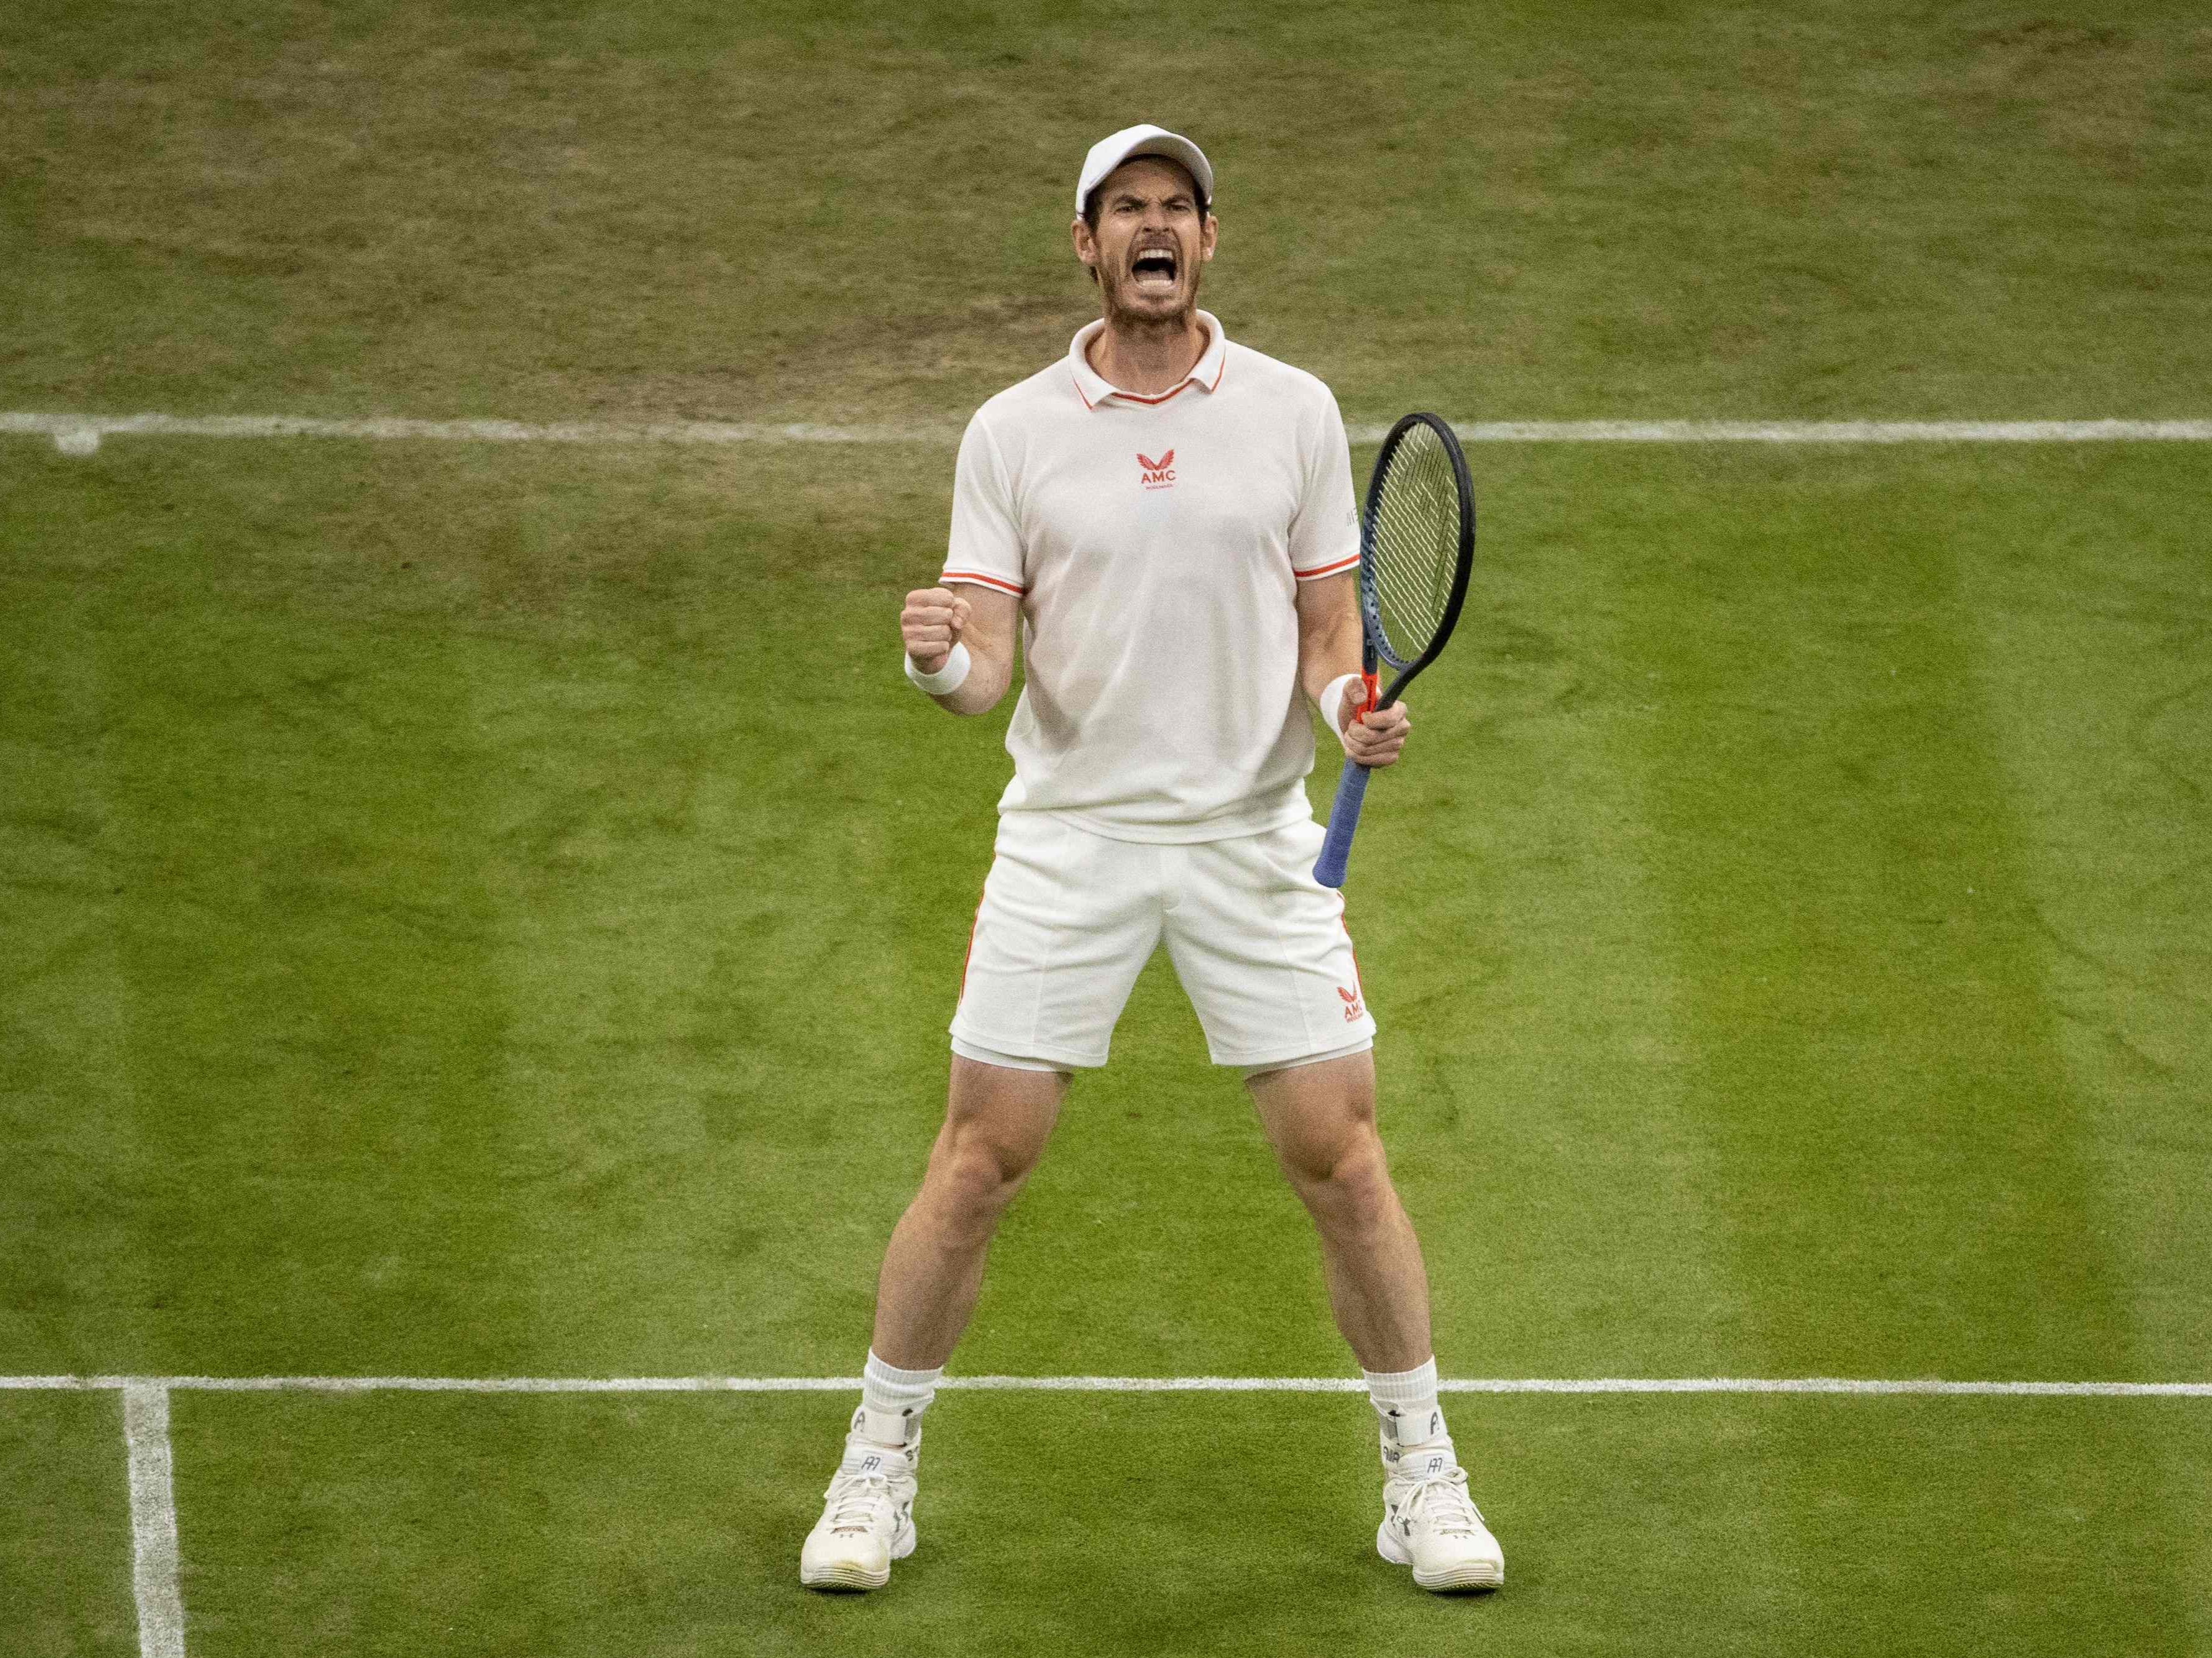 Andy Murray served up another classic on Centre Court